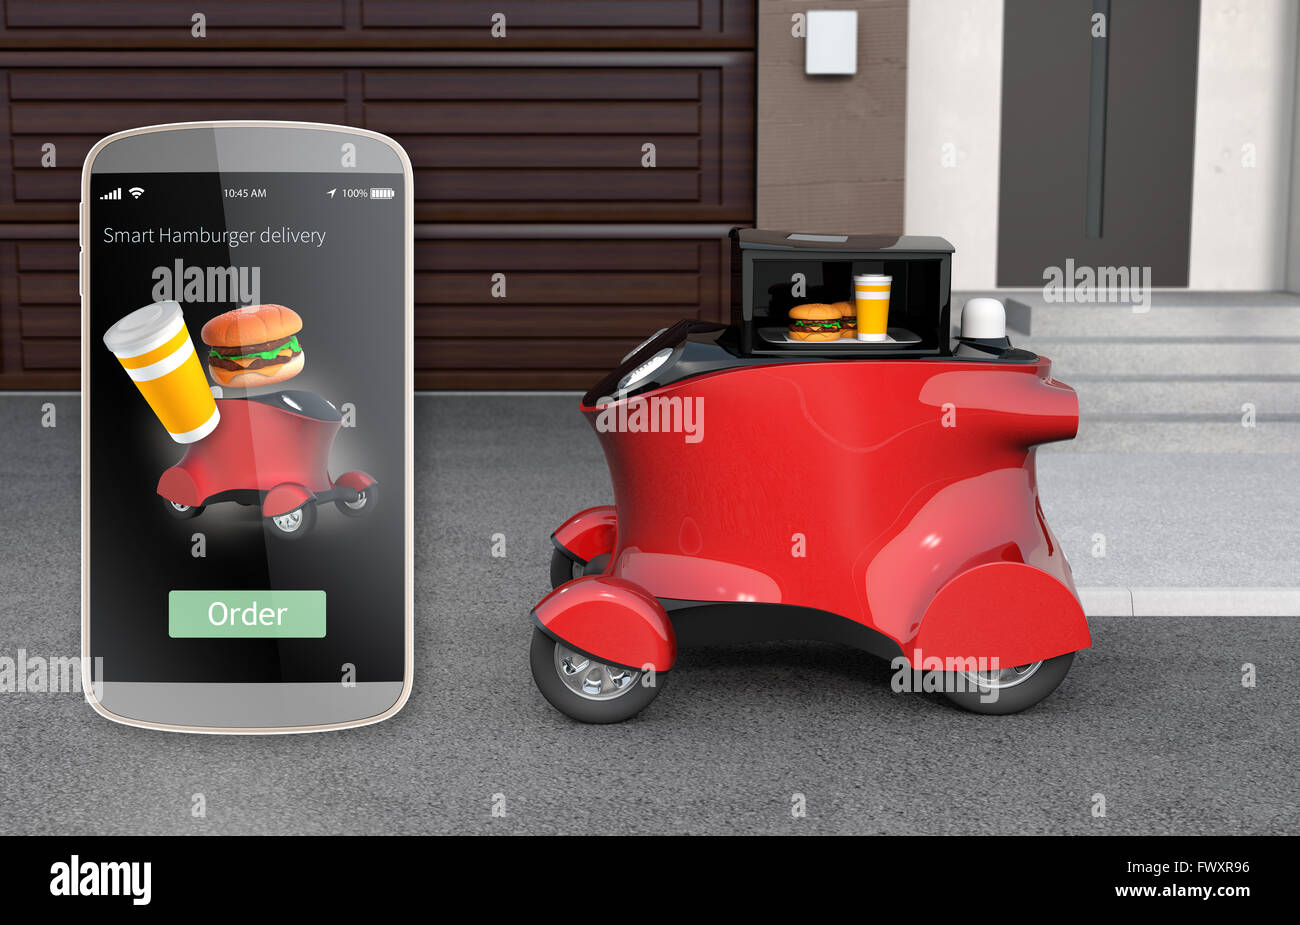 Delivery robot  waiting for picking hamburger. Smart phone order GUI interface on  the left side. Stock Photo